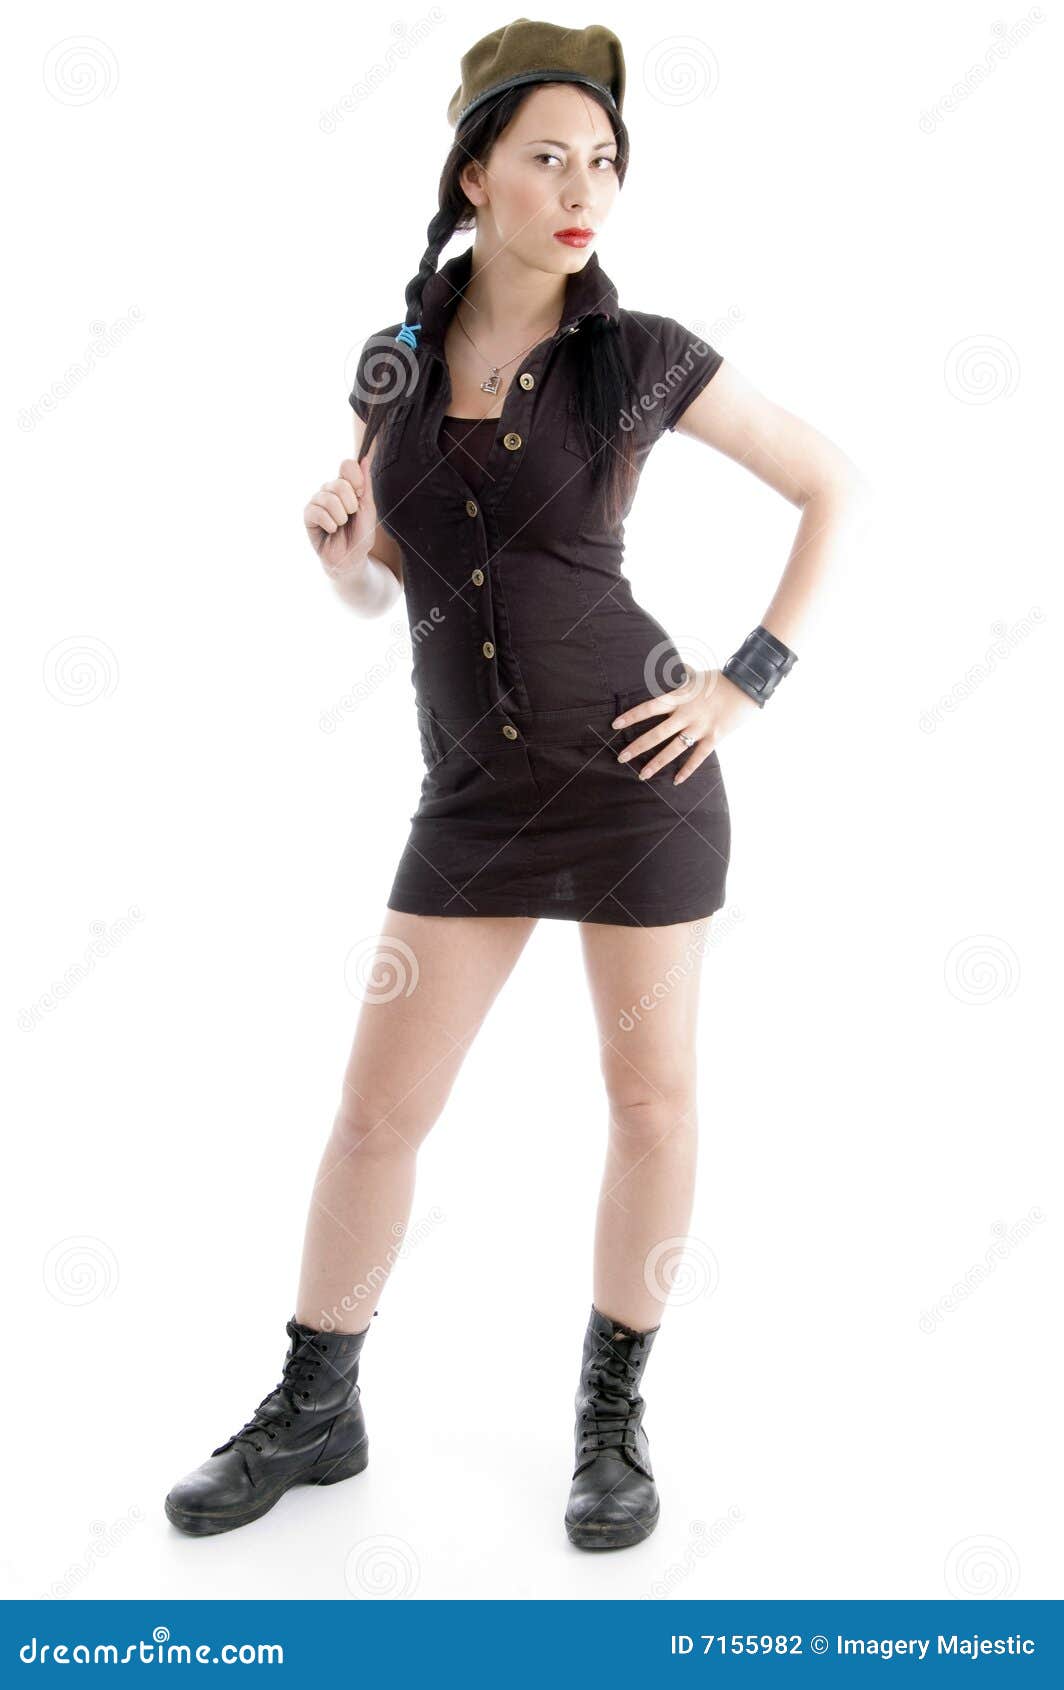 Full Body Pose Of Young Model Stock Photography - Image: 7155982